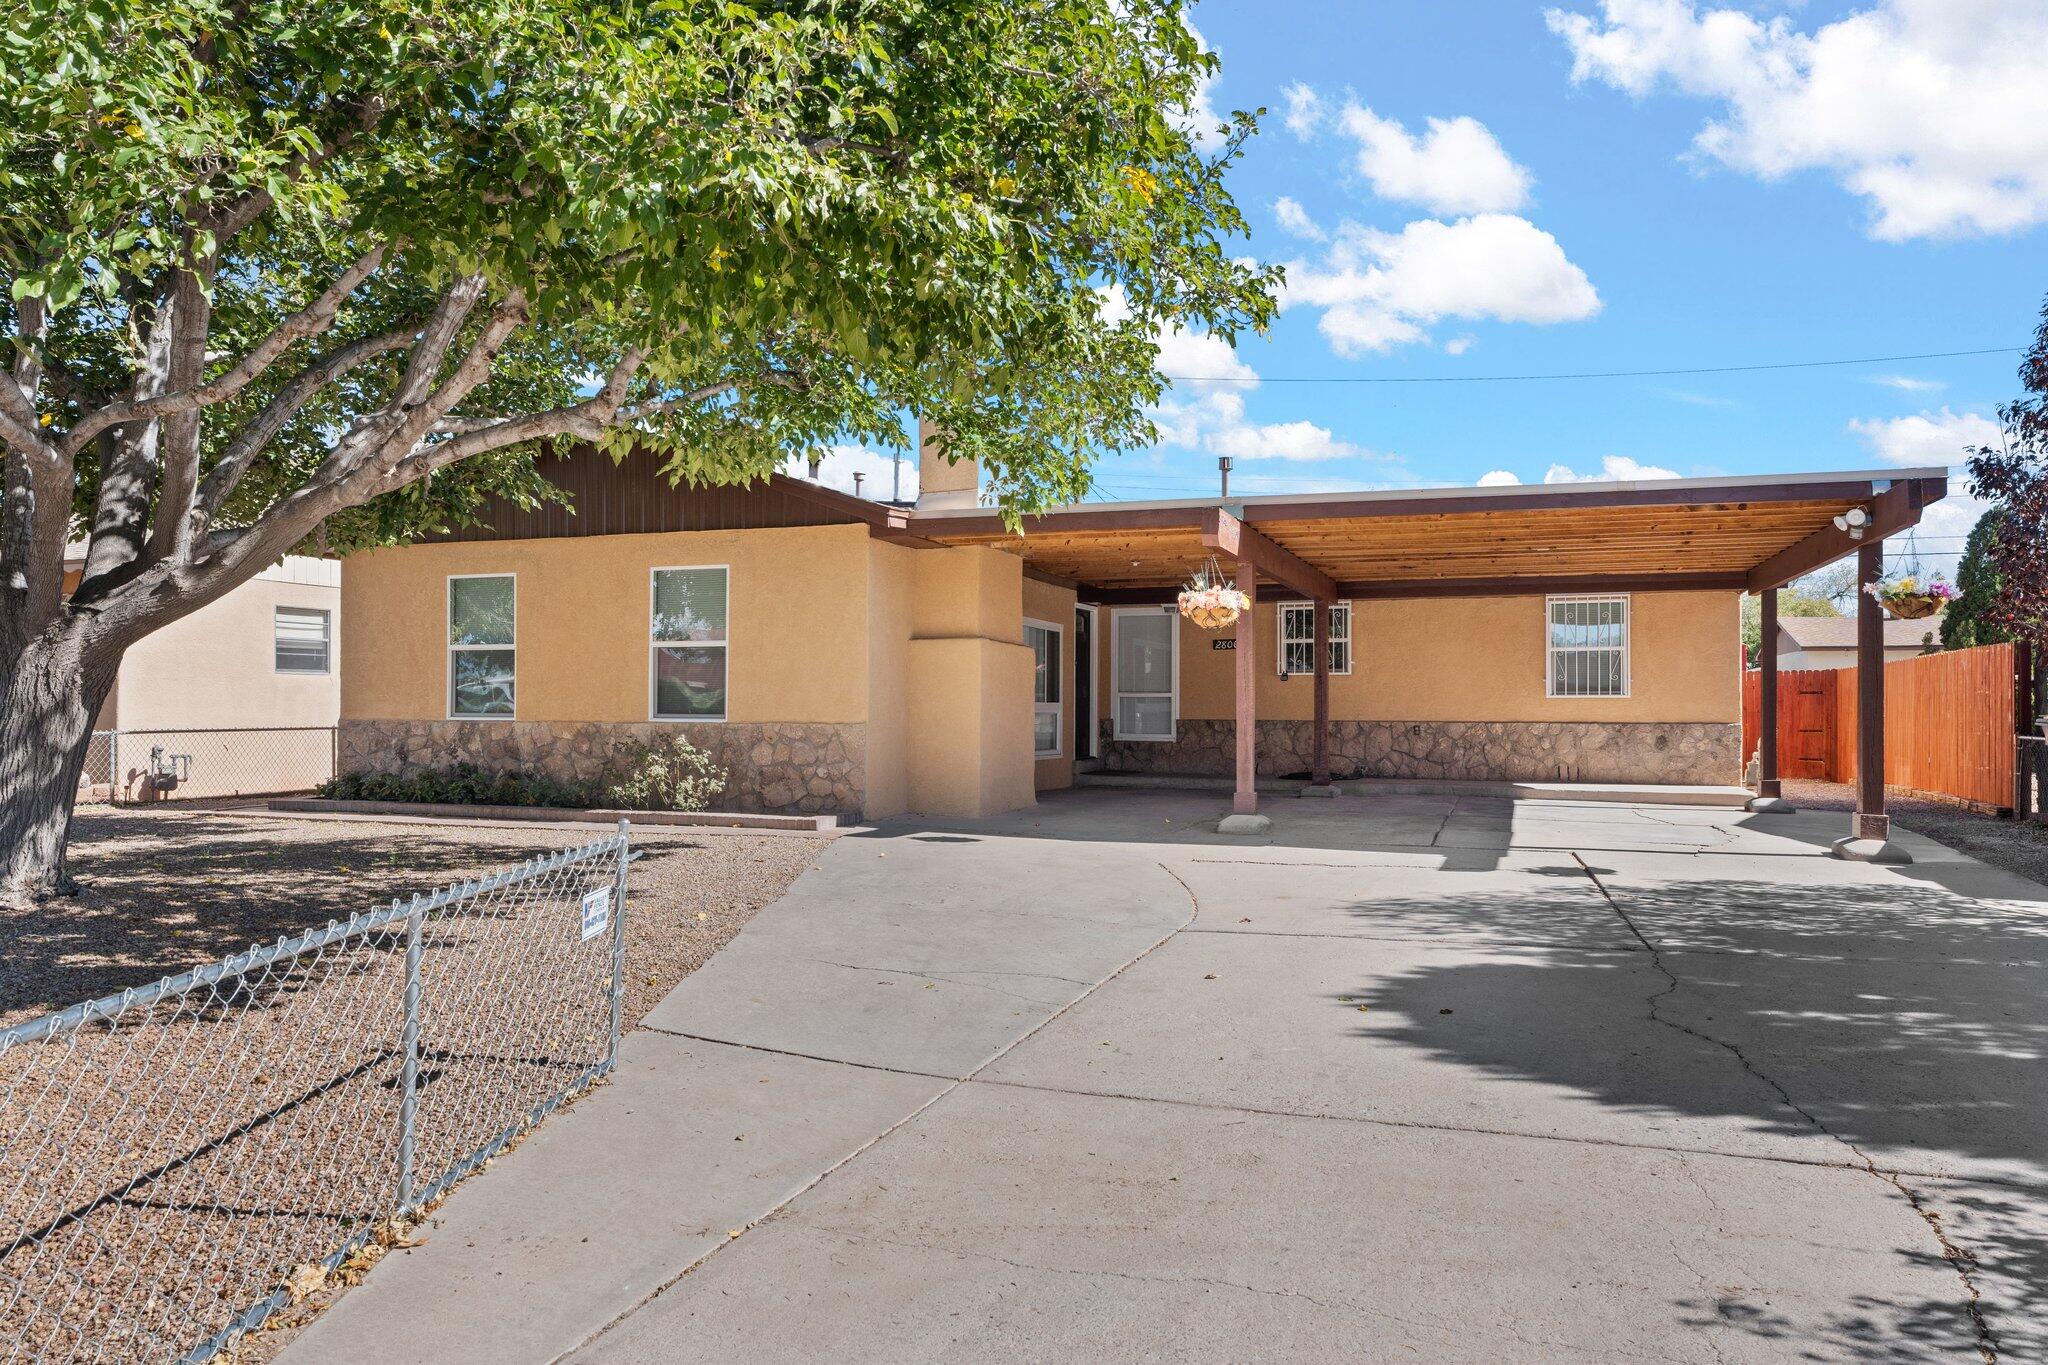 2800 San Isidro Street NW, Albuquerque, New Mexico 87104, 3 Bedrooms Bedrooms, ,2 BathroomsBathrooms,Residential,For Sale,2800 San Isidro Street NW,1044008